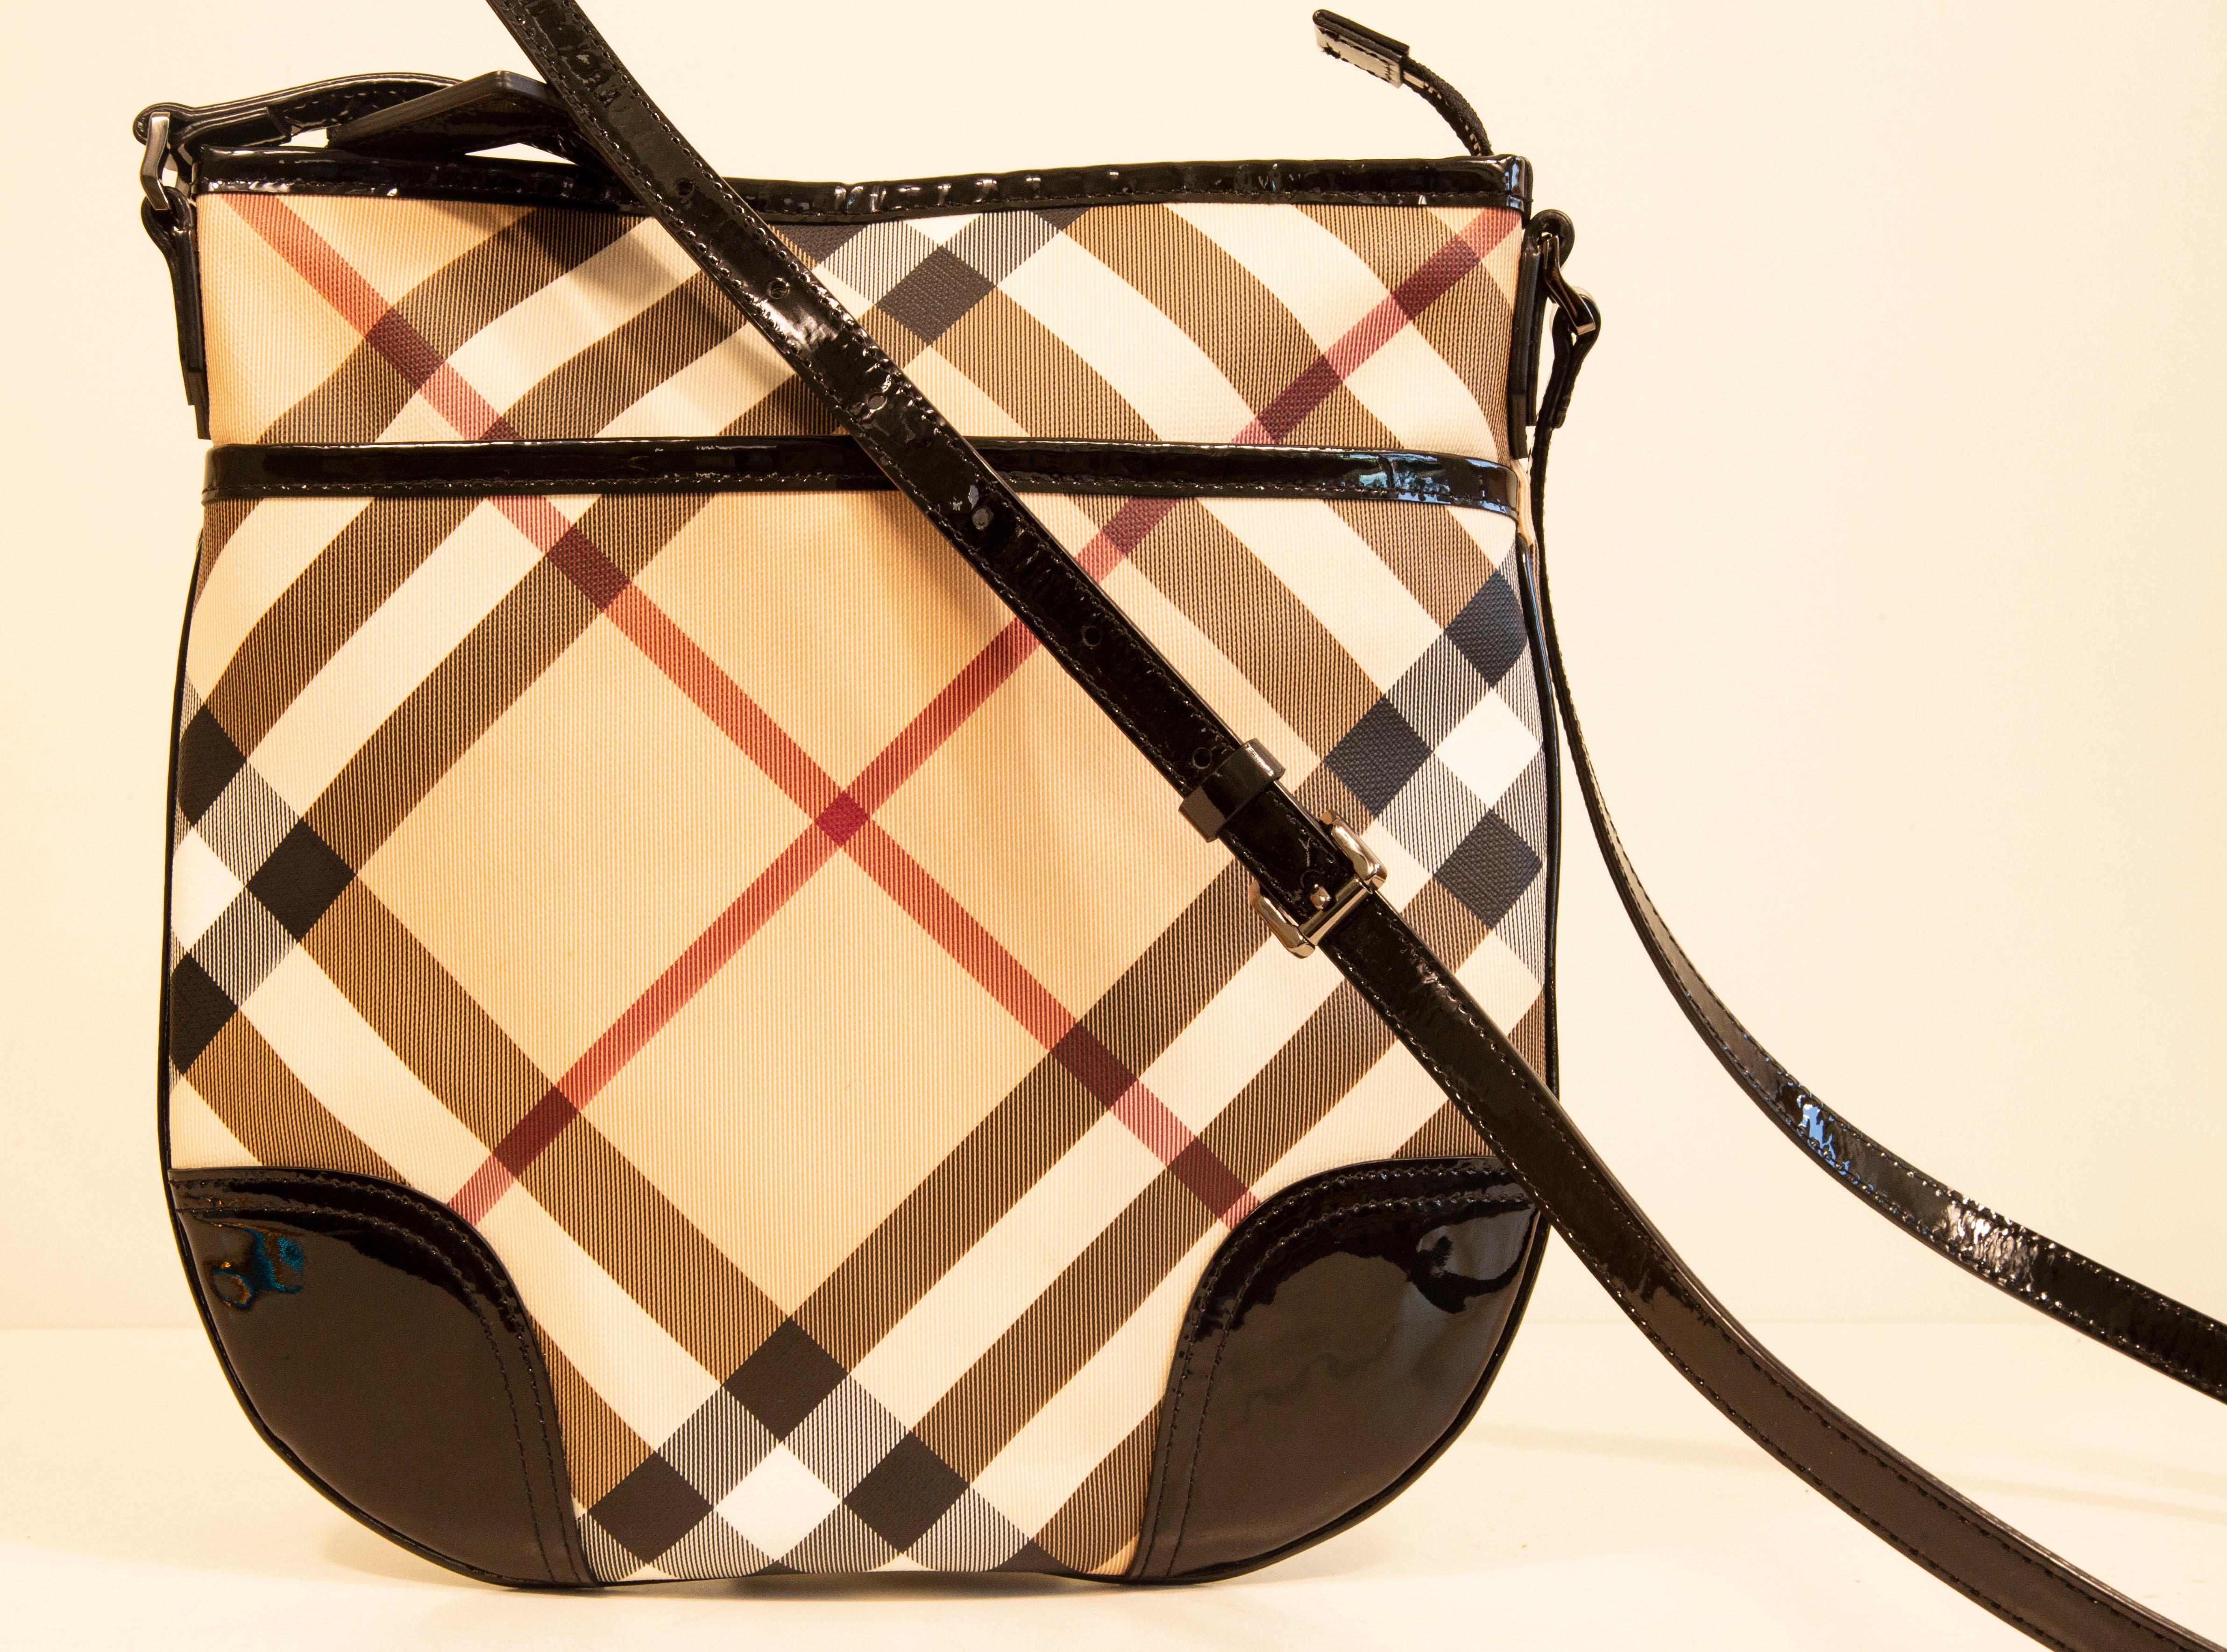 Burberry Dryden crossbody bag made of coated canvas with black patent leather trim and shiny pewter toned hardware. The exterior features the Burberry Nova Check pattern. The interior is lined with beige fabric, and next to the major compartment it